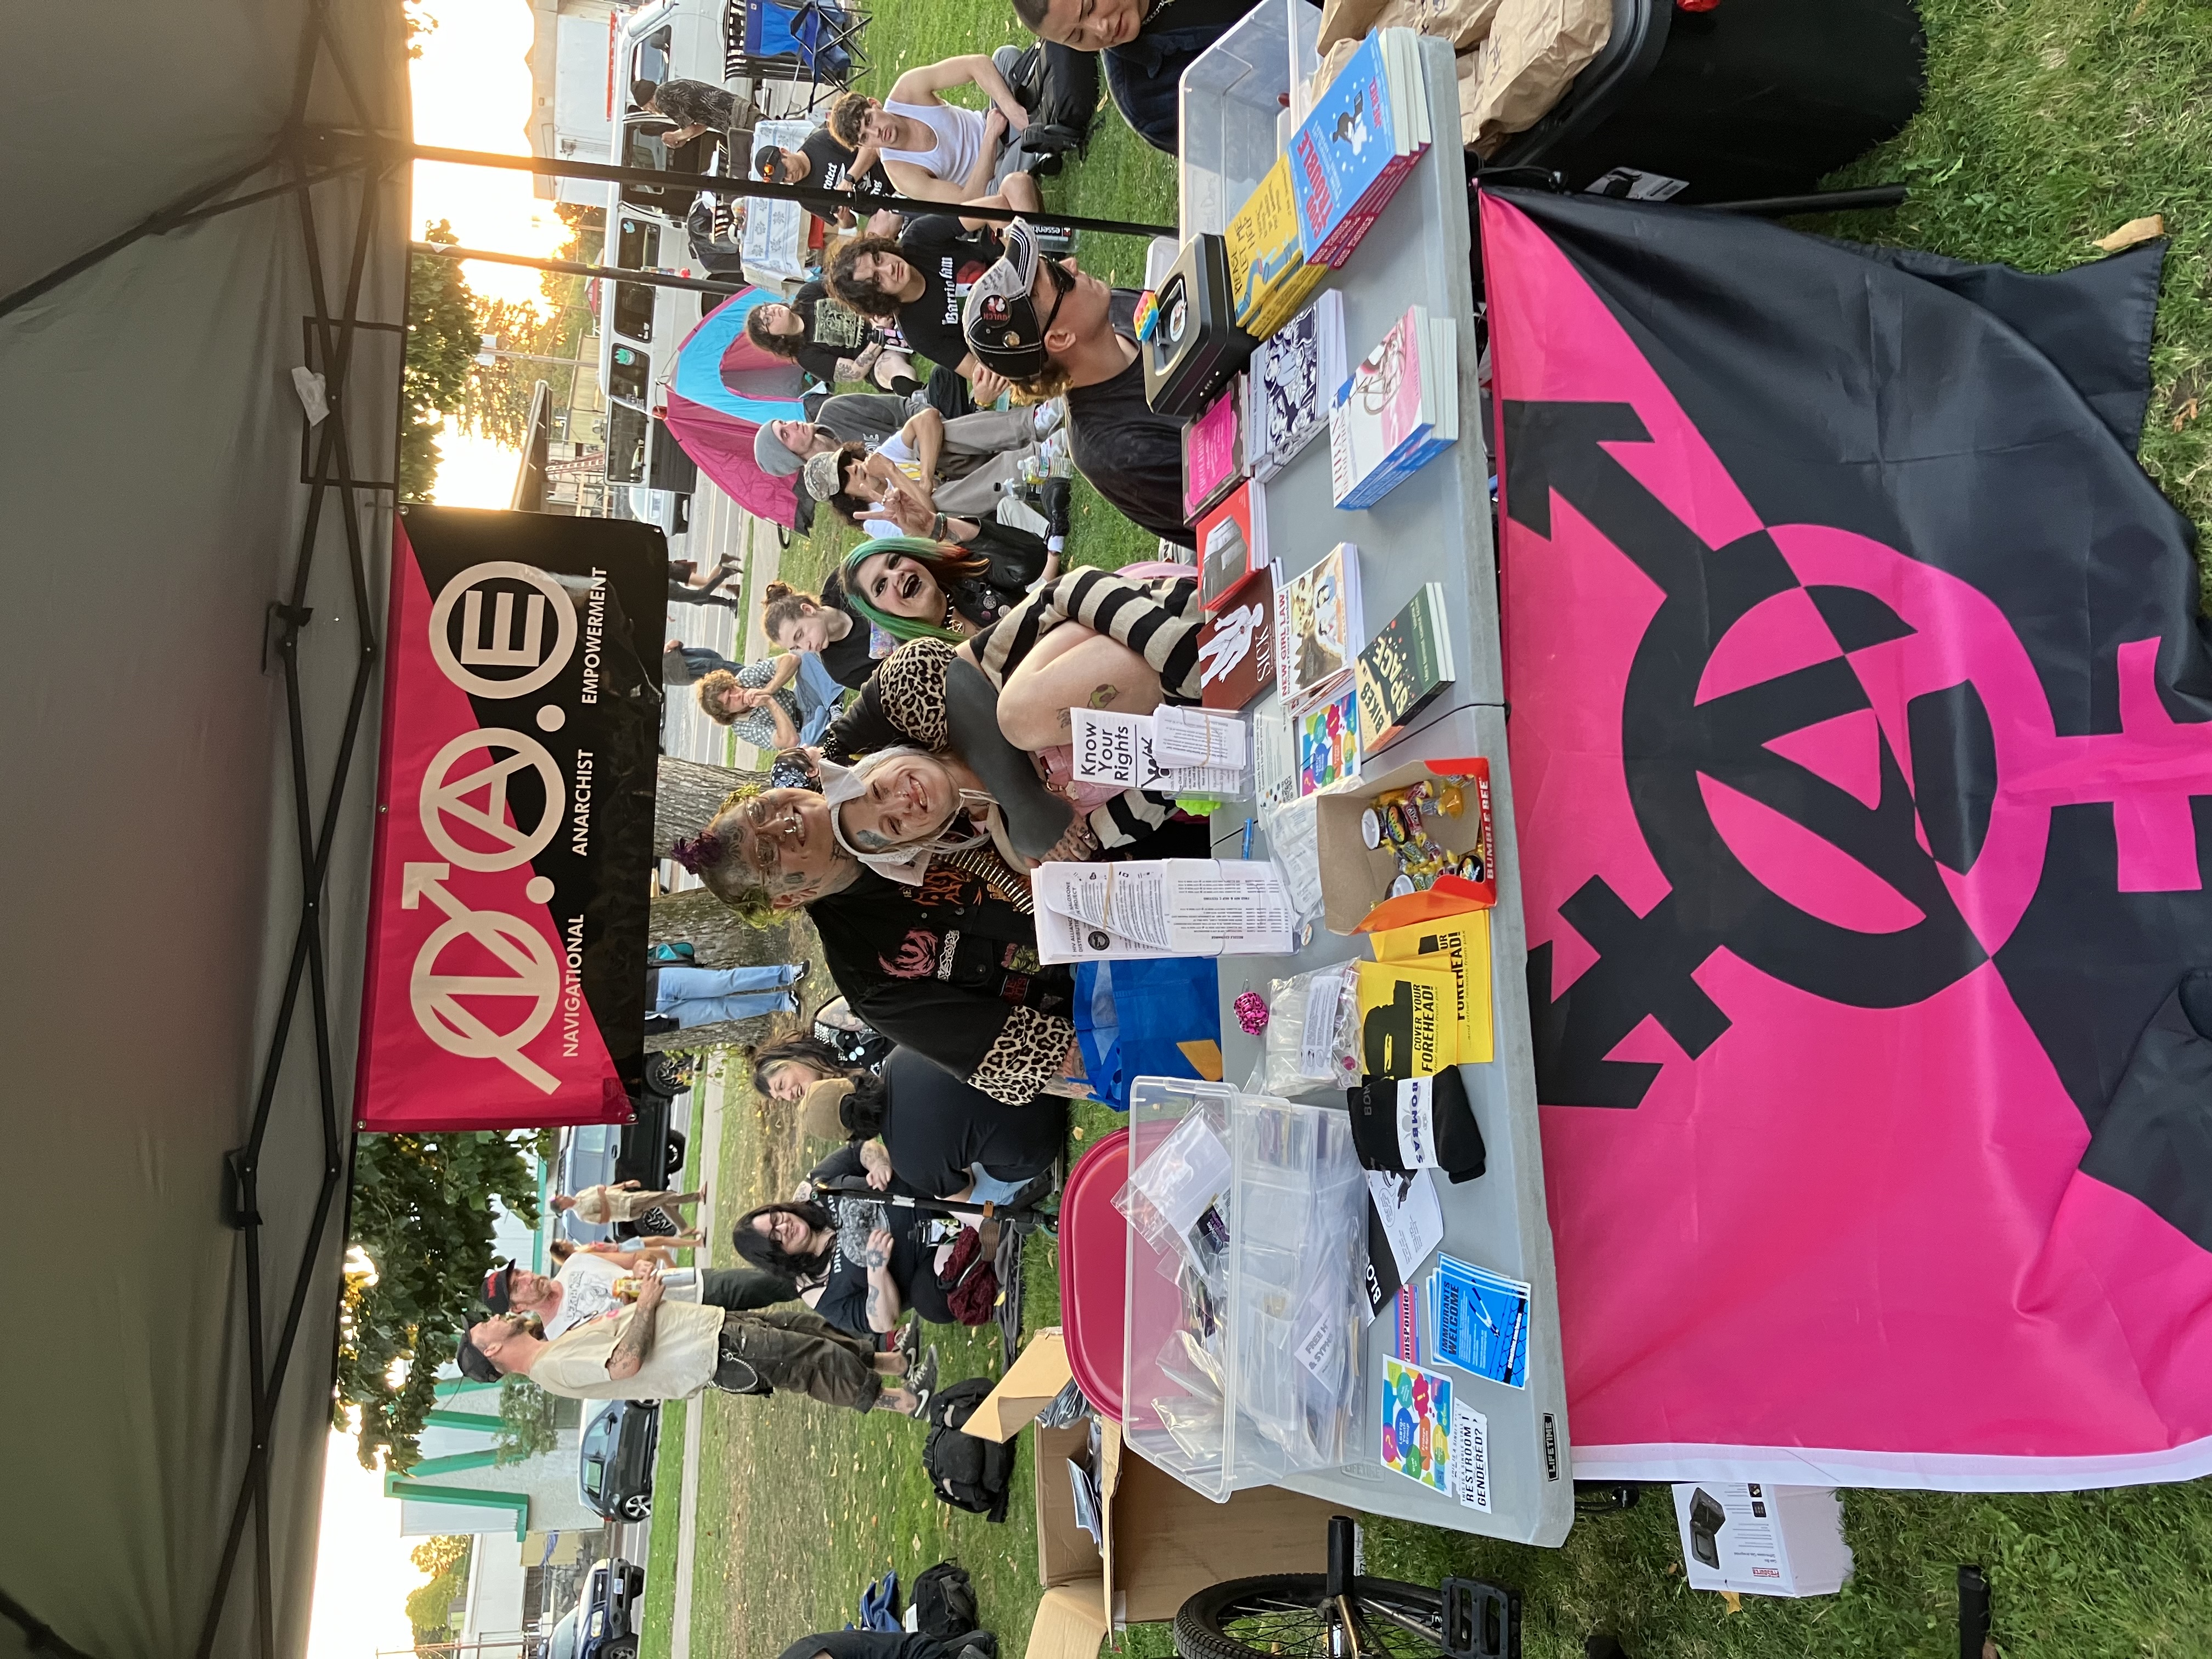 Navigational Anarchist Empowerment tabling at the event